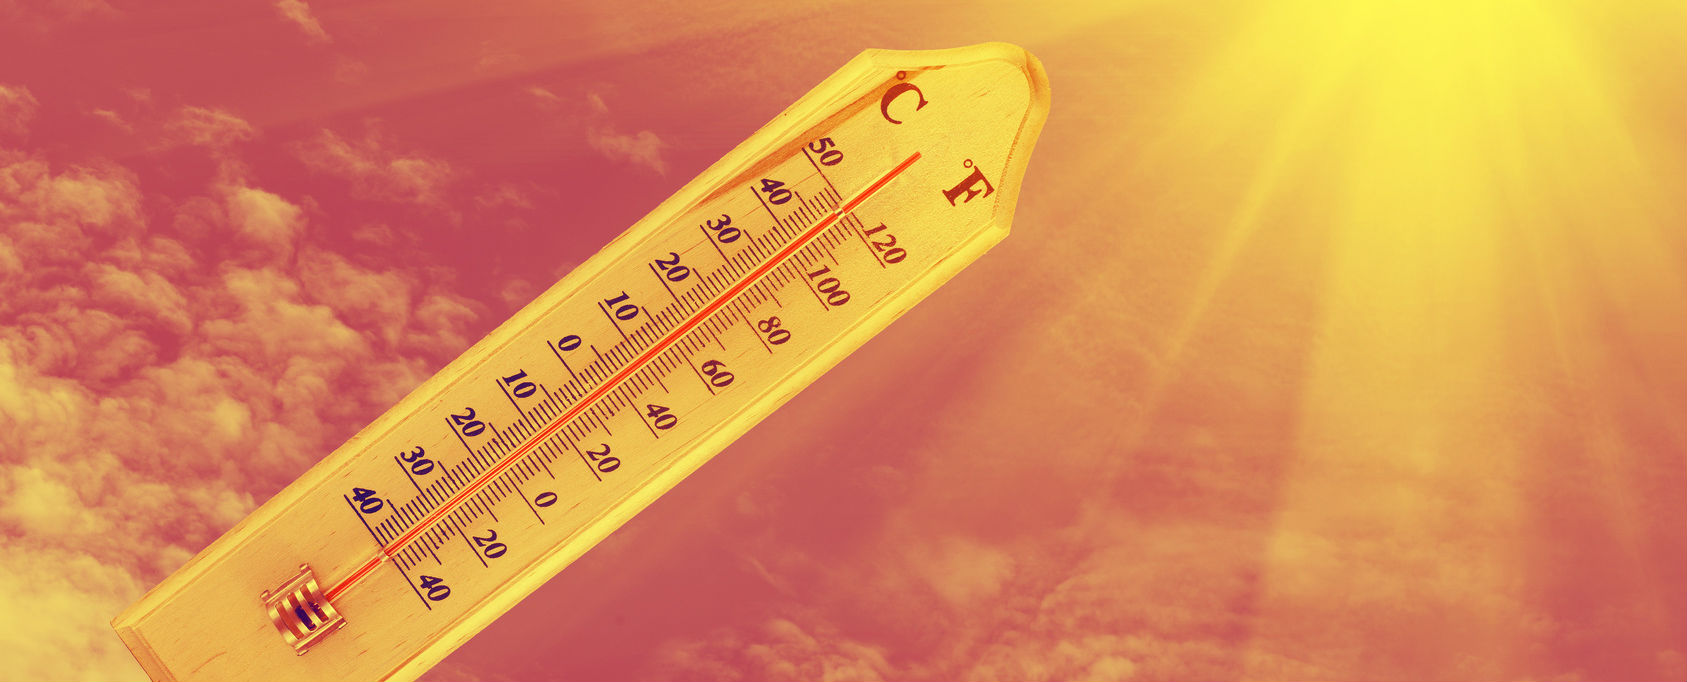 2015 likely to be the warmest year on record